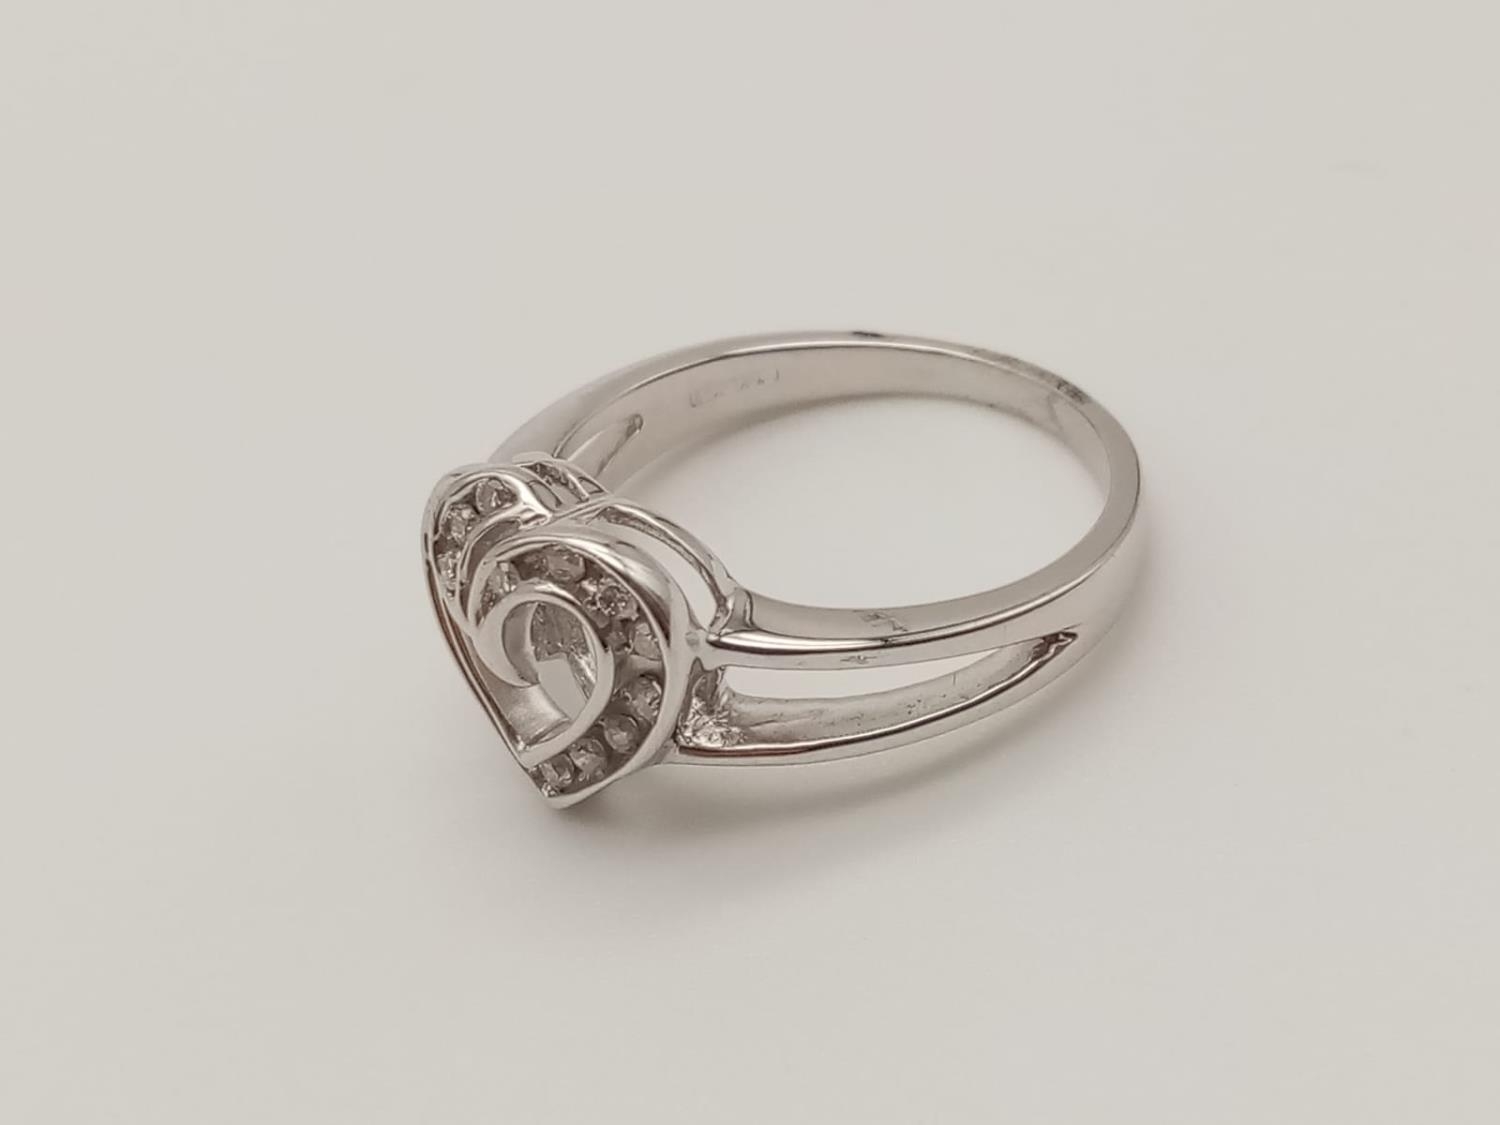 9k White gold DIAMOND SET HEART RING, weight 3.7g and approx 0.25ct diamonds, size O - Image 2 of 6